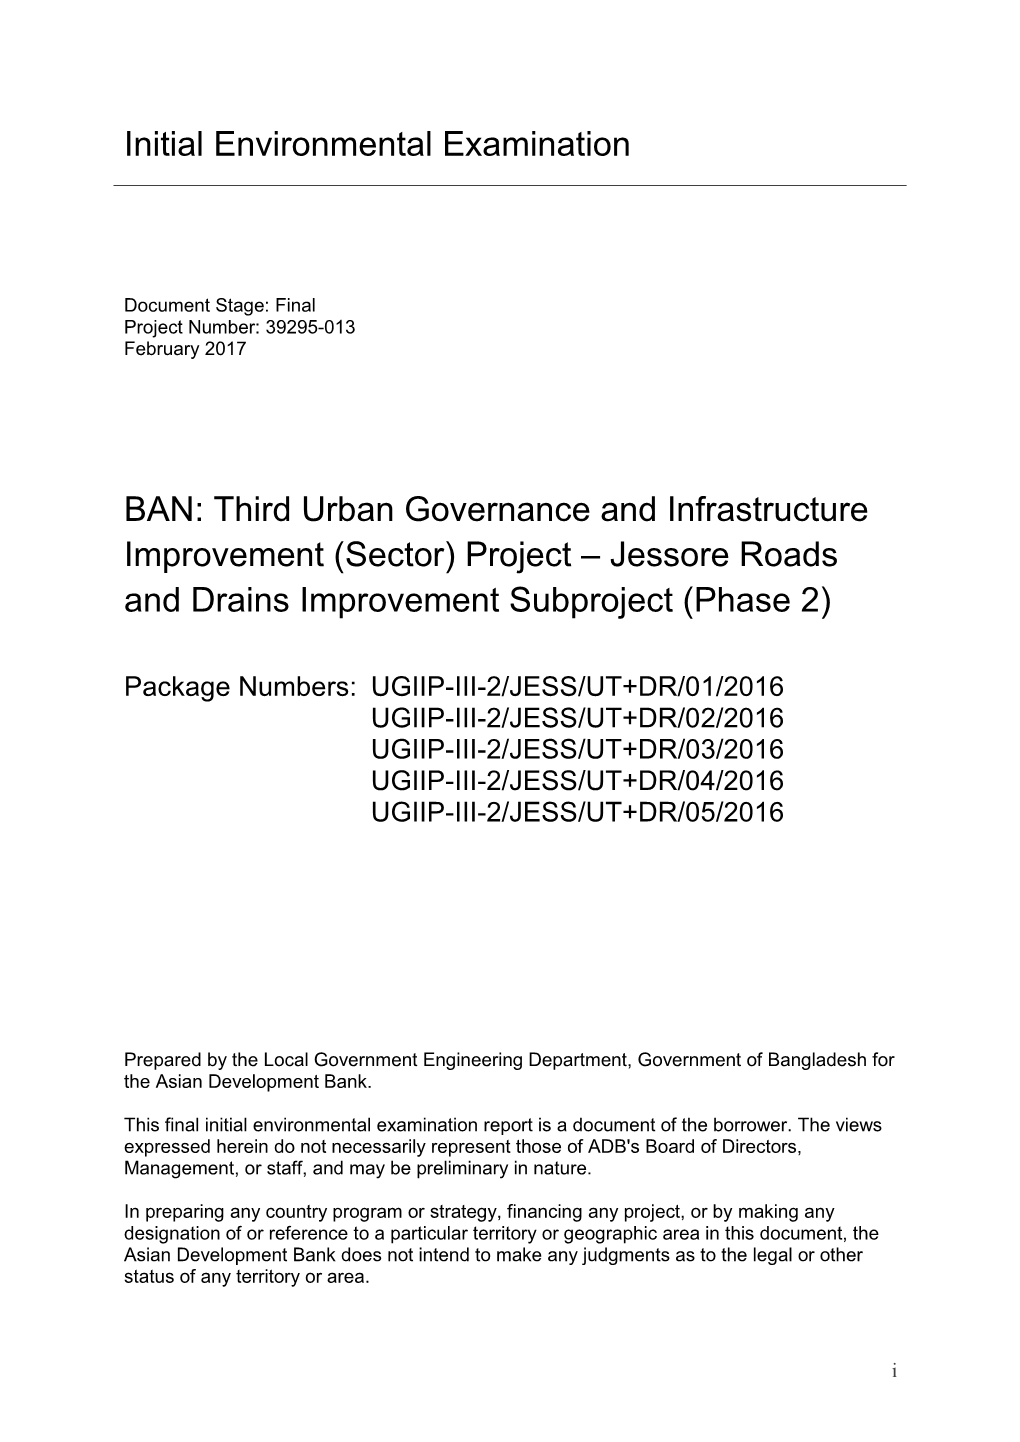 Project – Jessore Roads and Drains Improvement Subproject (Phase 2)